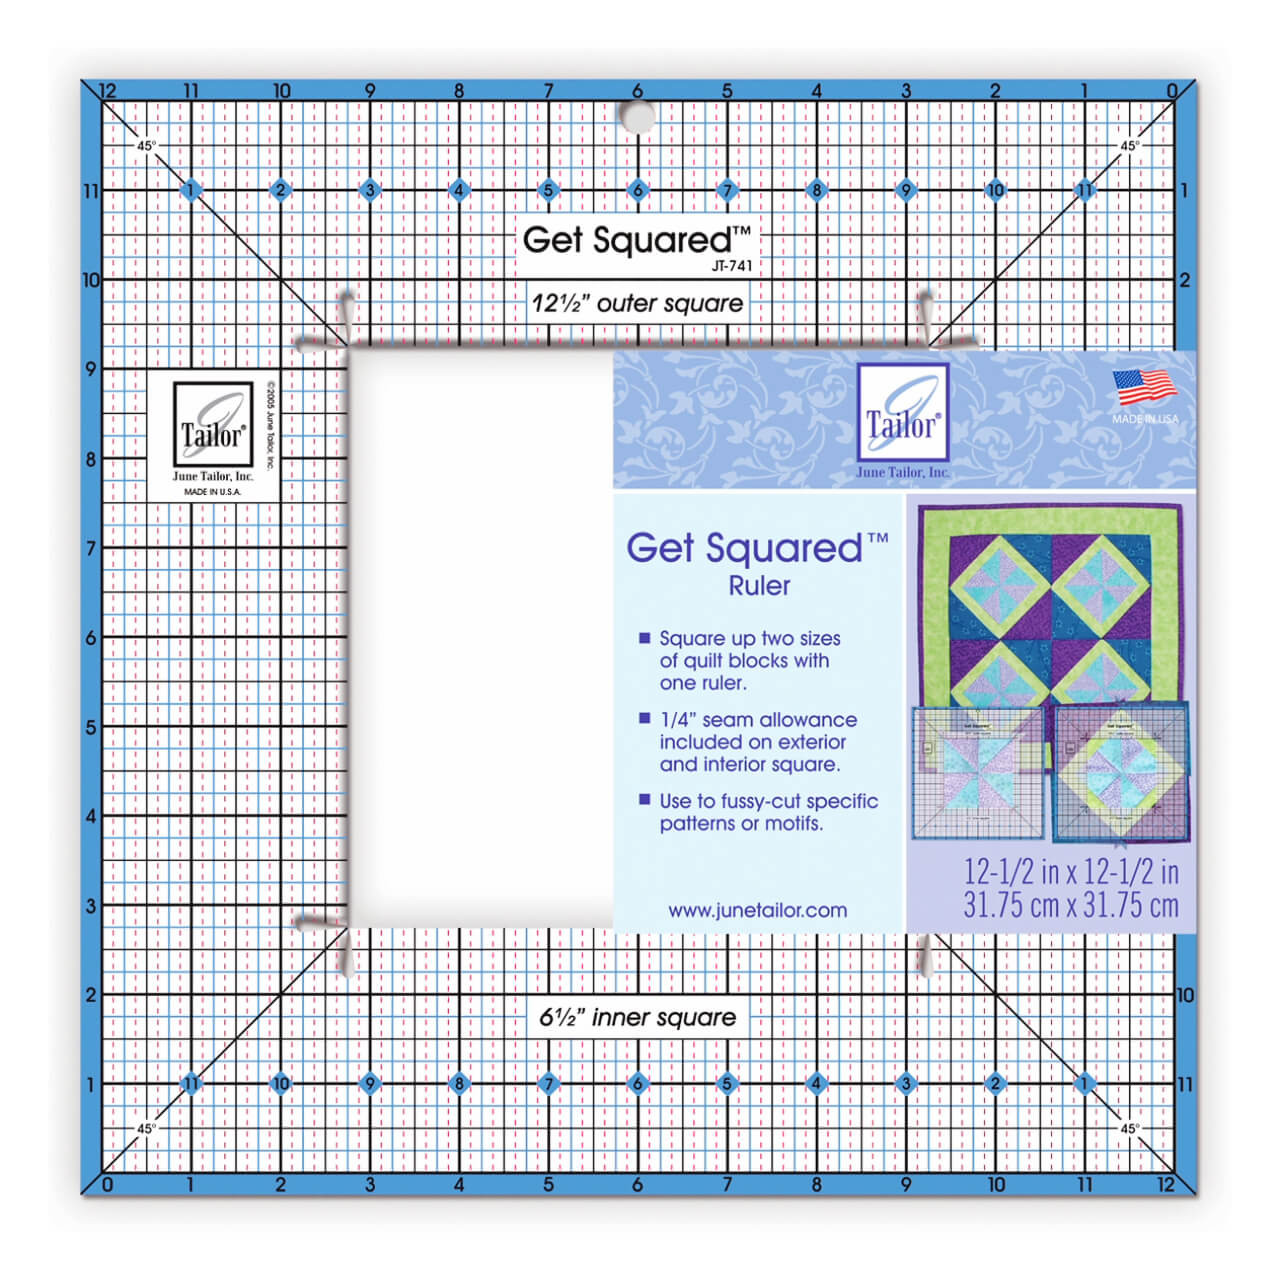 Image displaying the Large Get Squared Ruler by June Tailor, a square-shaped, clear ruler with grid lines and measurements for precise cutting of quilt blocks, featuring a 12 1/2 inch outer square and a 6 1/2 inch inner square, with detailed usage instructions on the label.